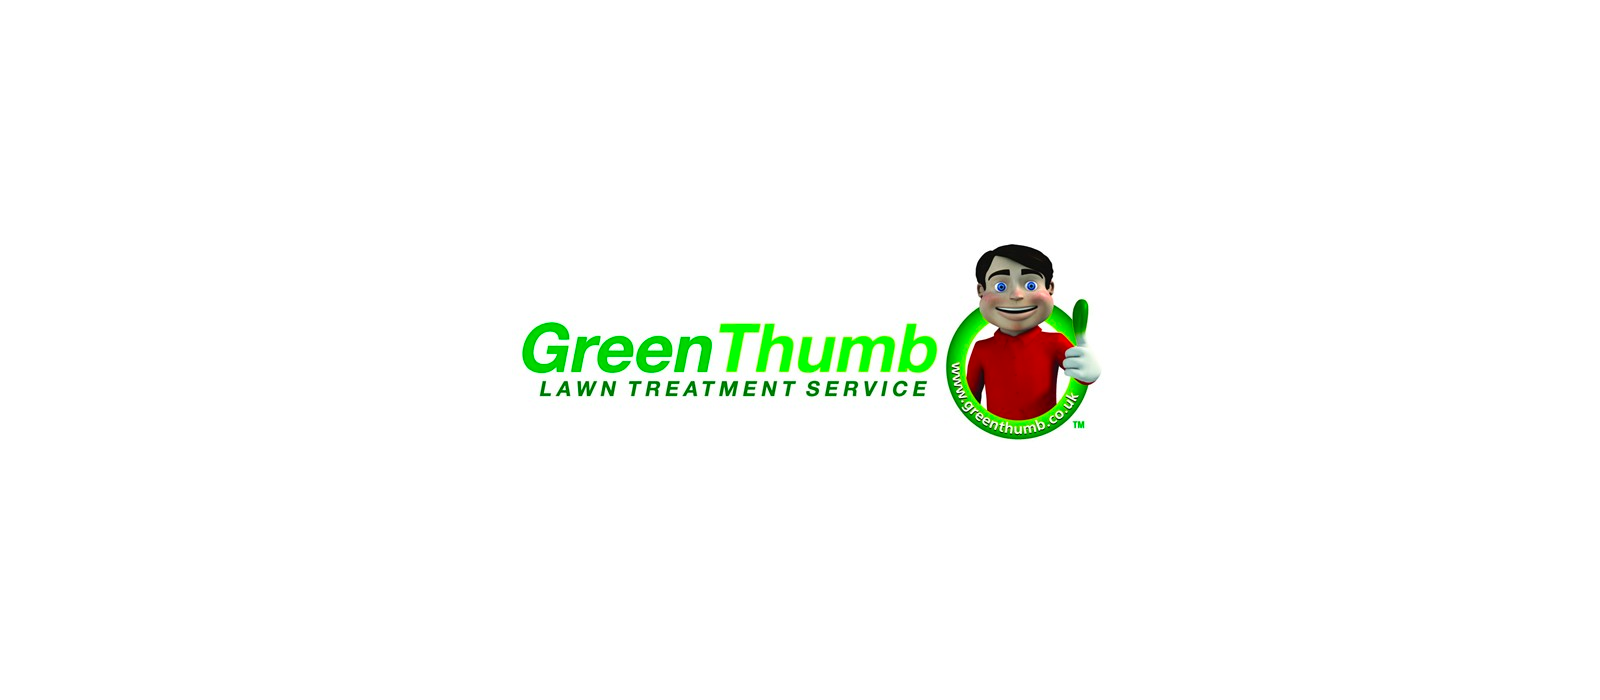 green thumb and click consult